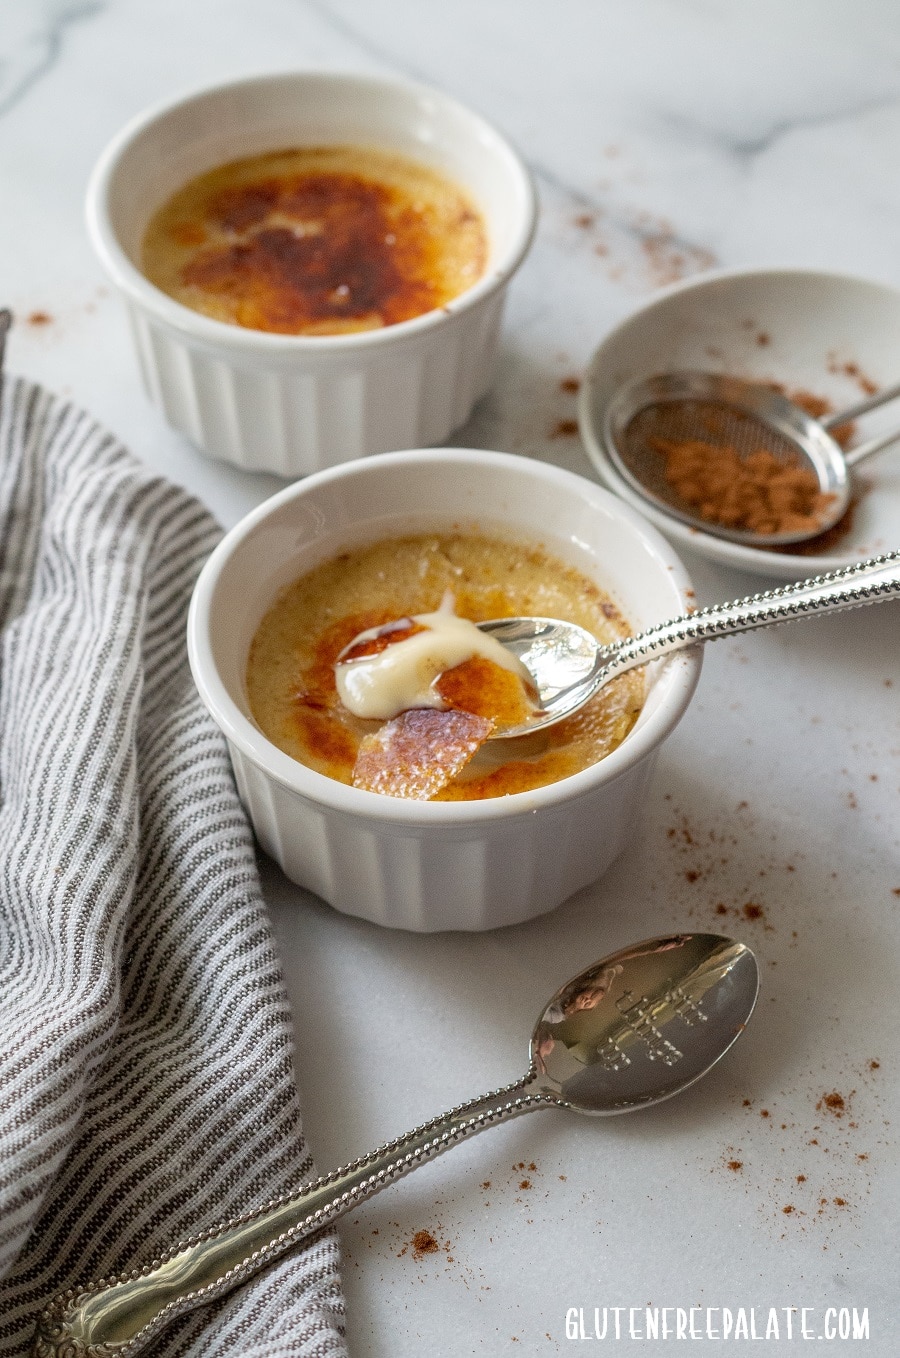 Chai Creme Brulee in a white ramekin with a spoon taking a bite out